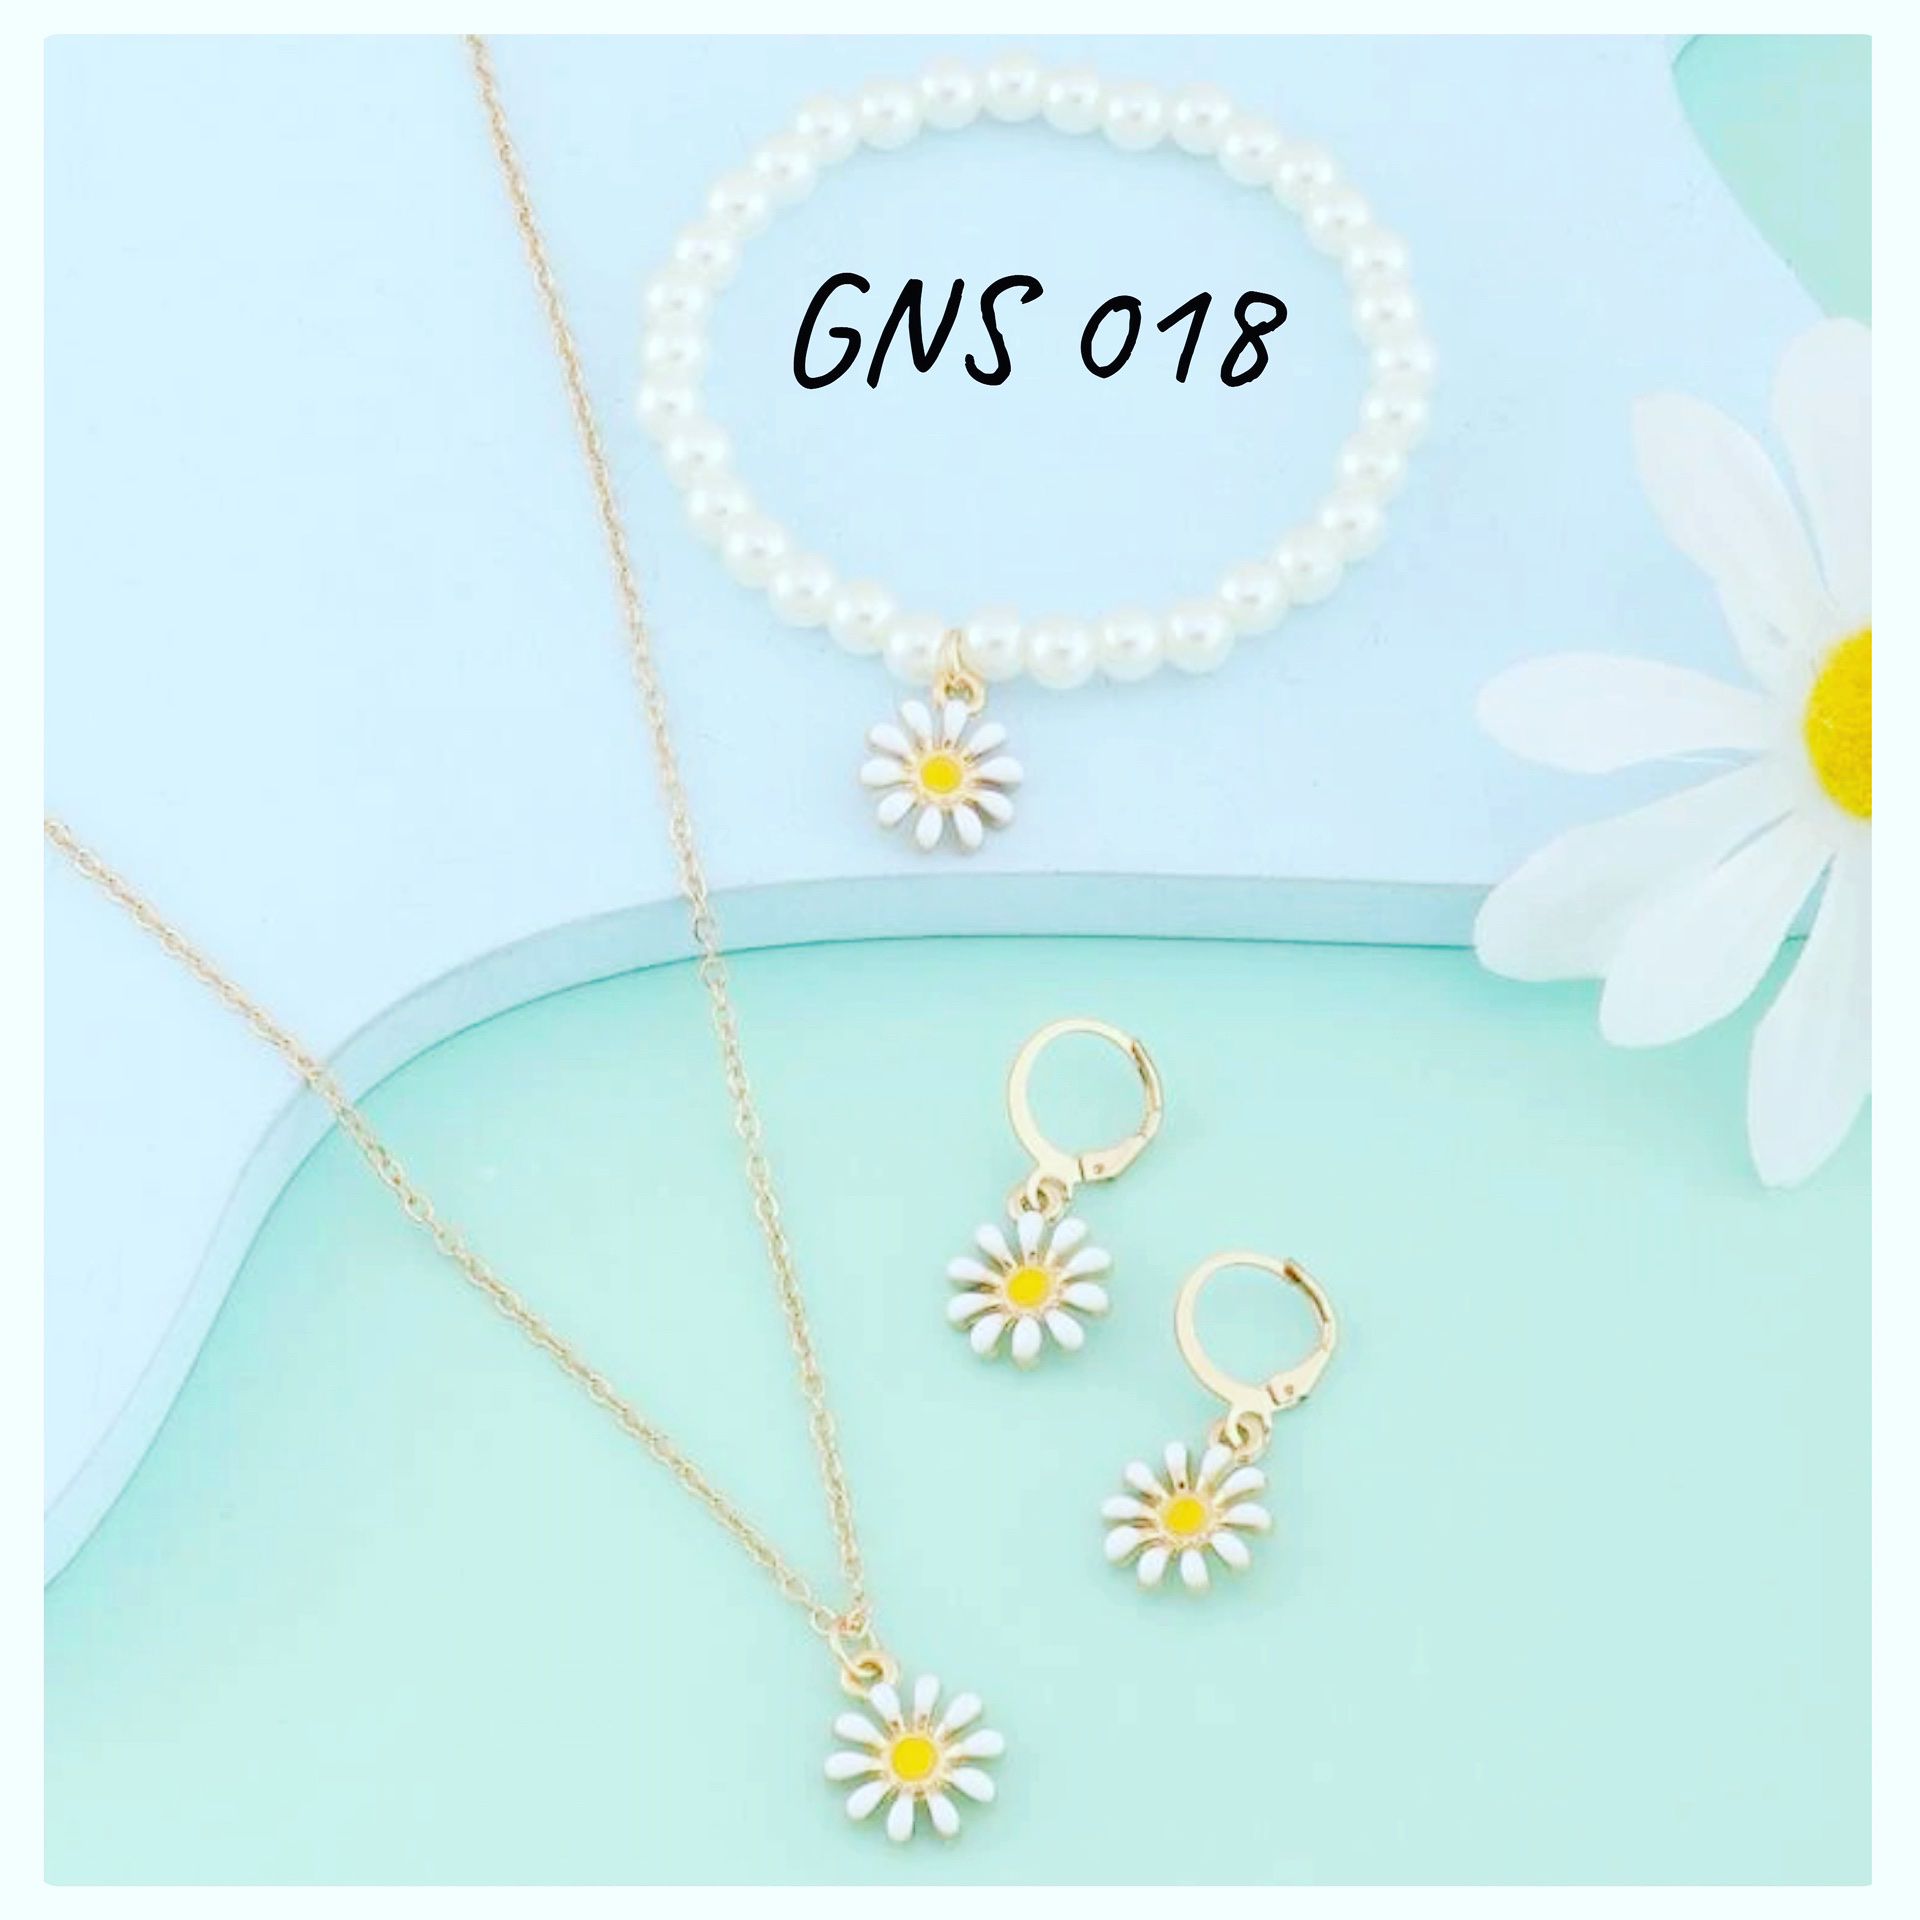 3 Pcs Necklace Set Bracelet Earrings For Girls Women Gifts Shipping Free For All Orders Over $25